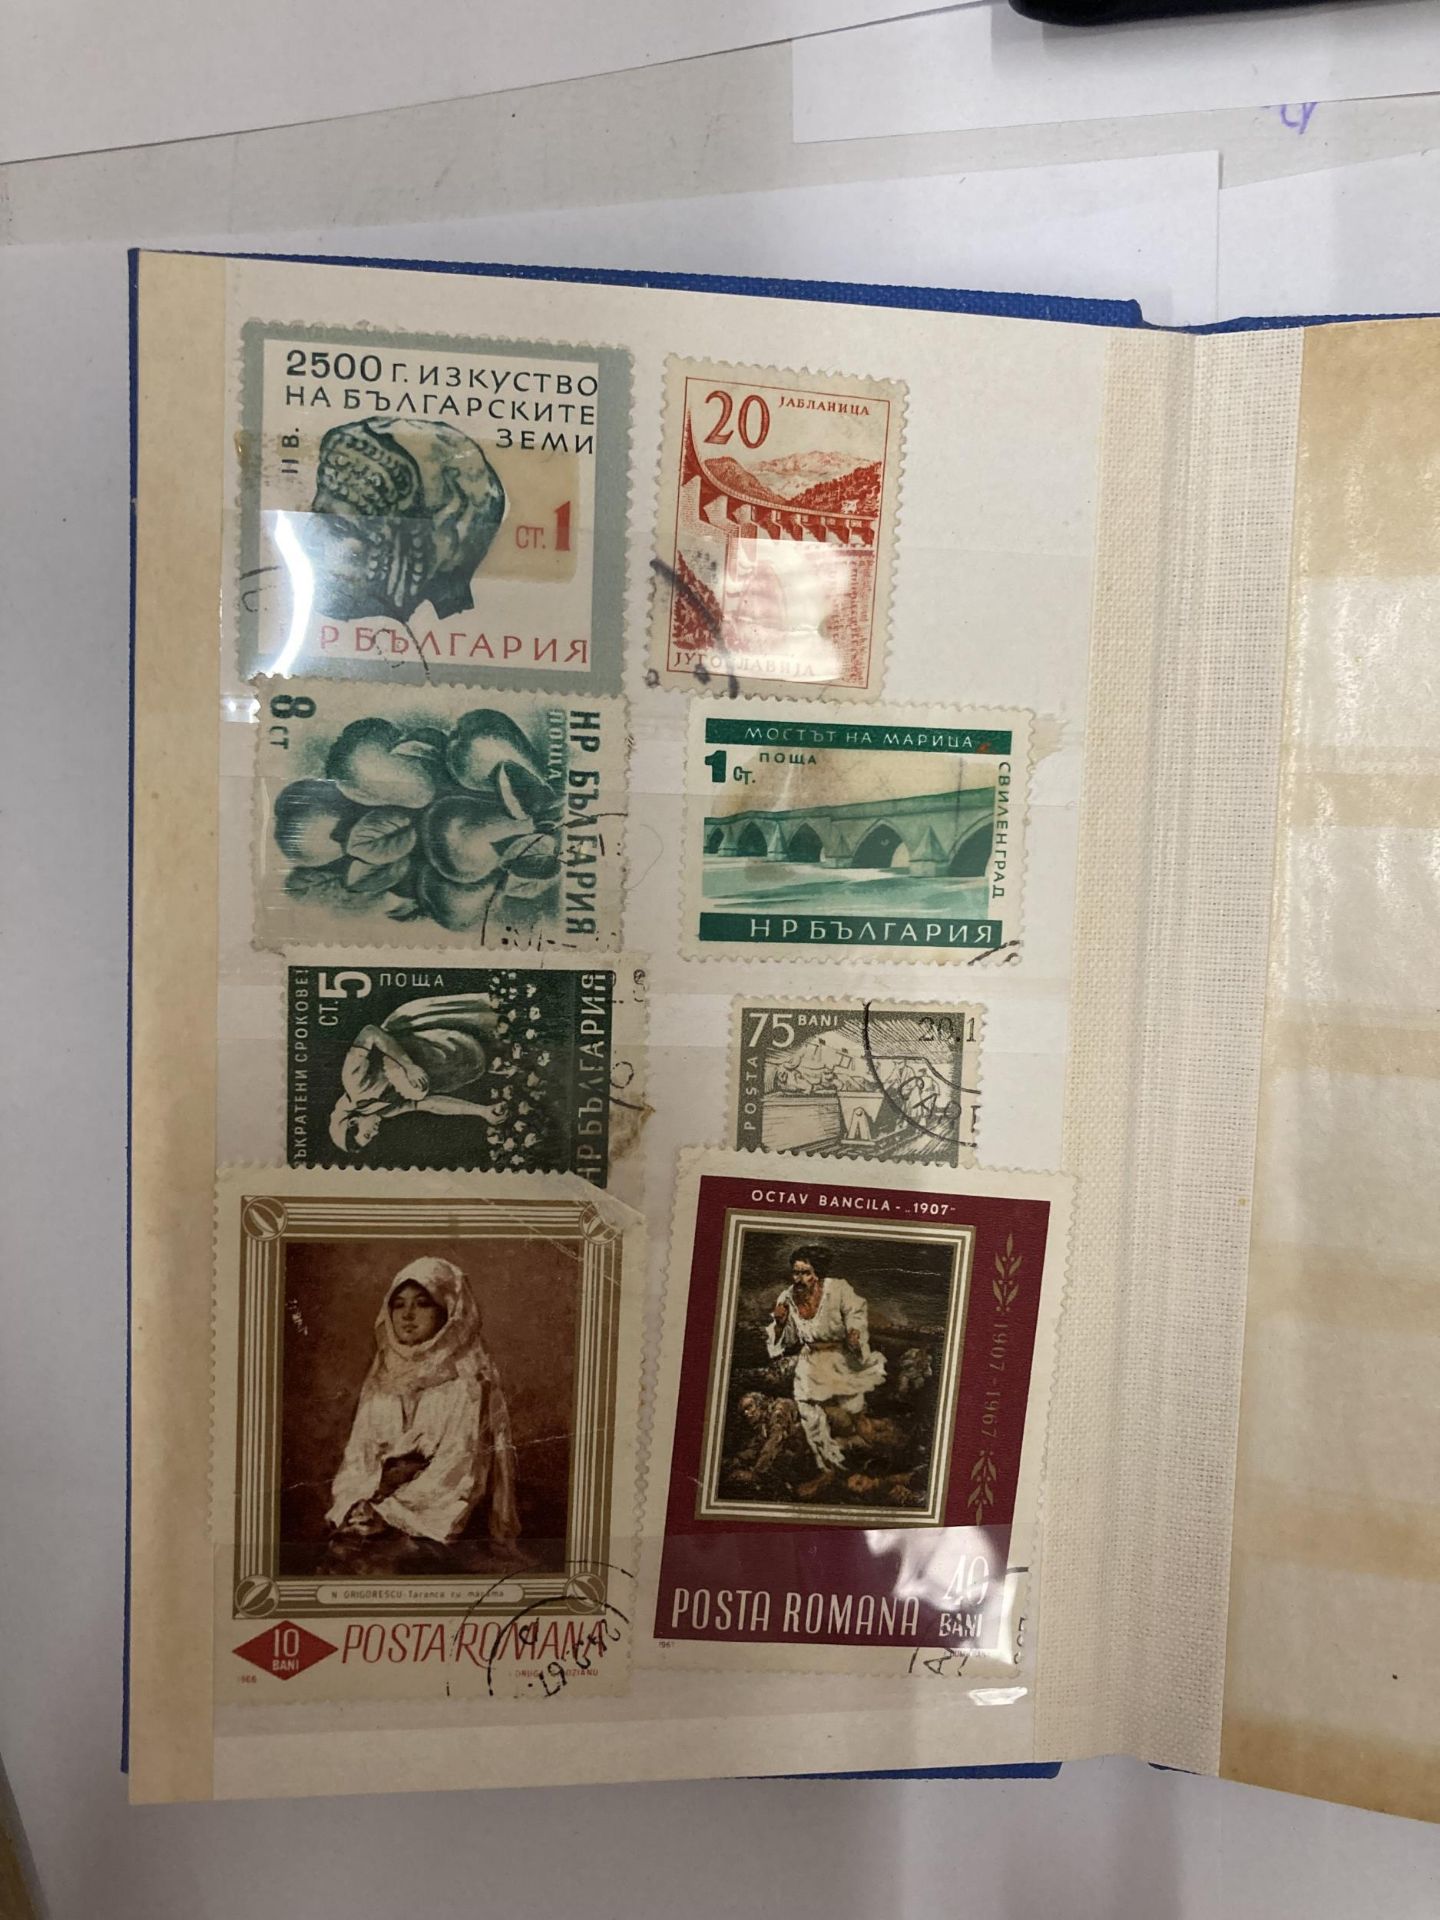 A VINTAGE STAMP ALBUM WITH BRITISH AND WORLDWIDE STAMPS AND TWO FURTHER SMALLER ALBUMS - Image 5 of 6